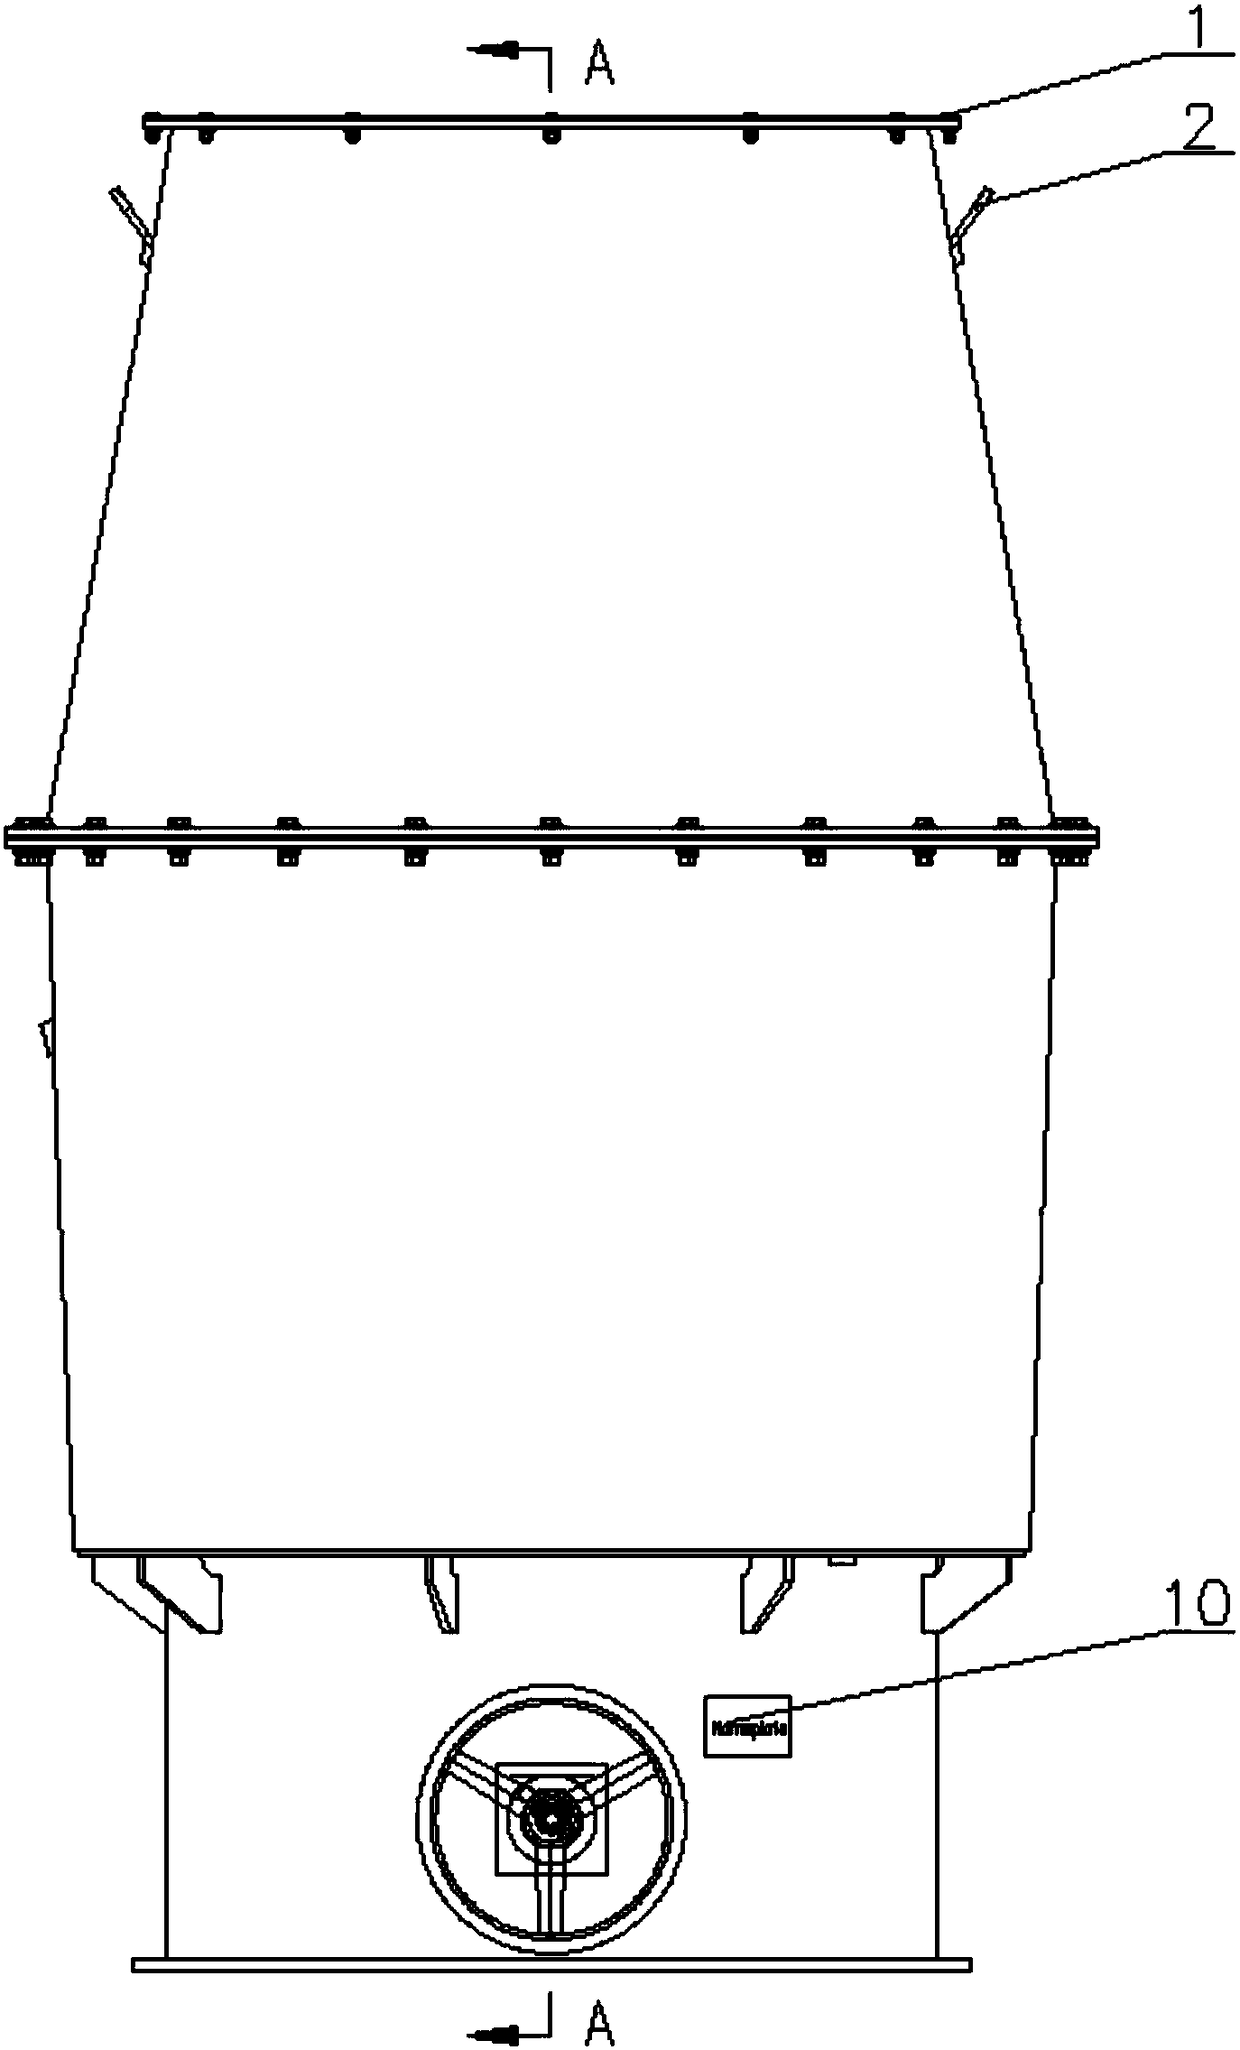 A side-opening ventilation device with a weathertight mechanism